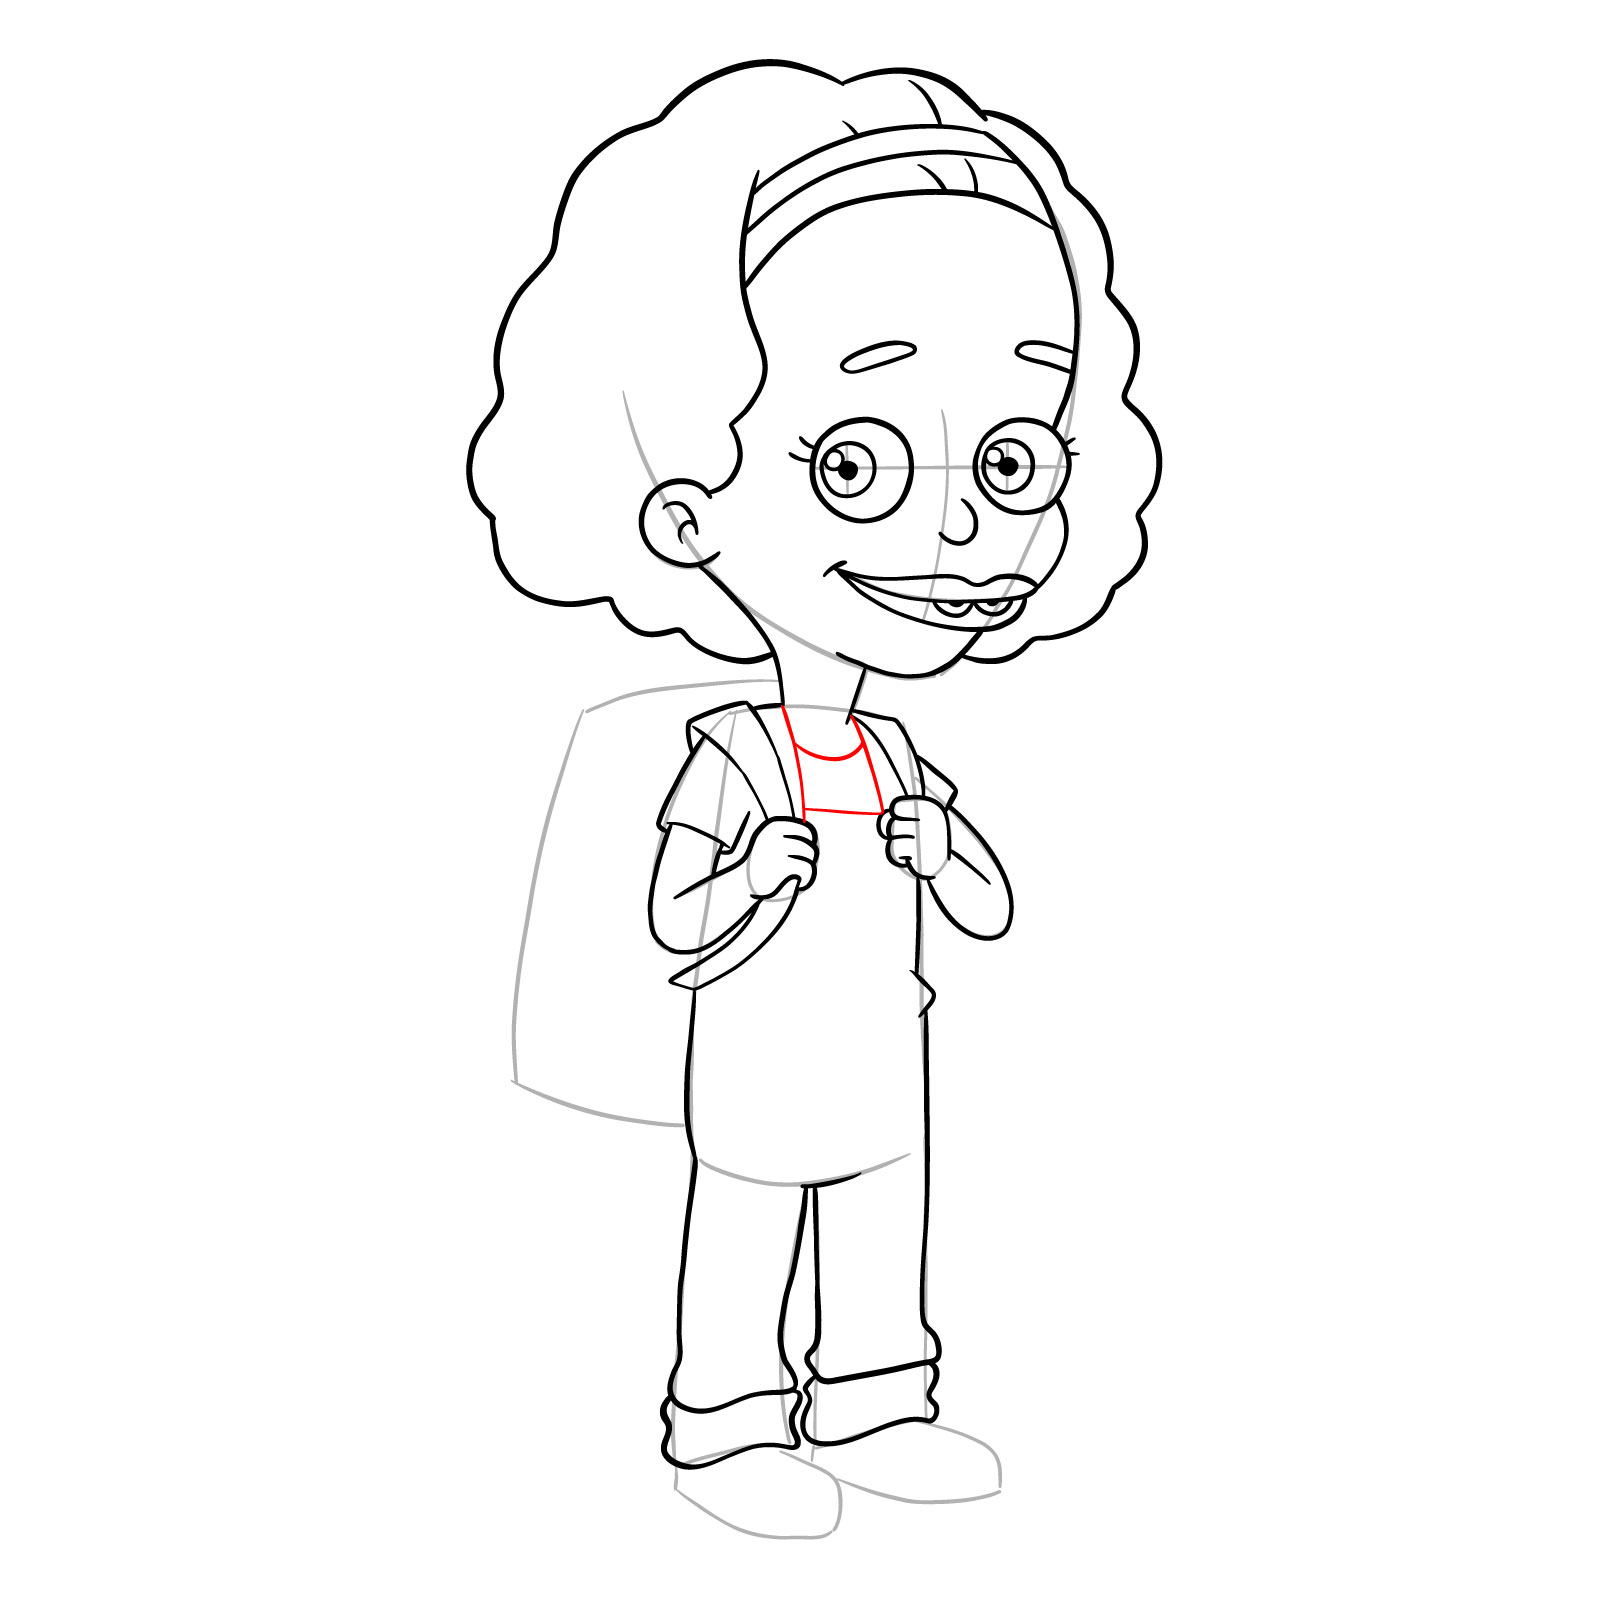 How to draw Missy from Big Mouth - step 23